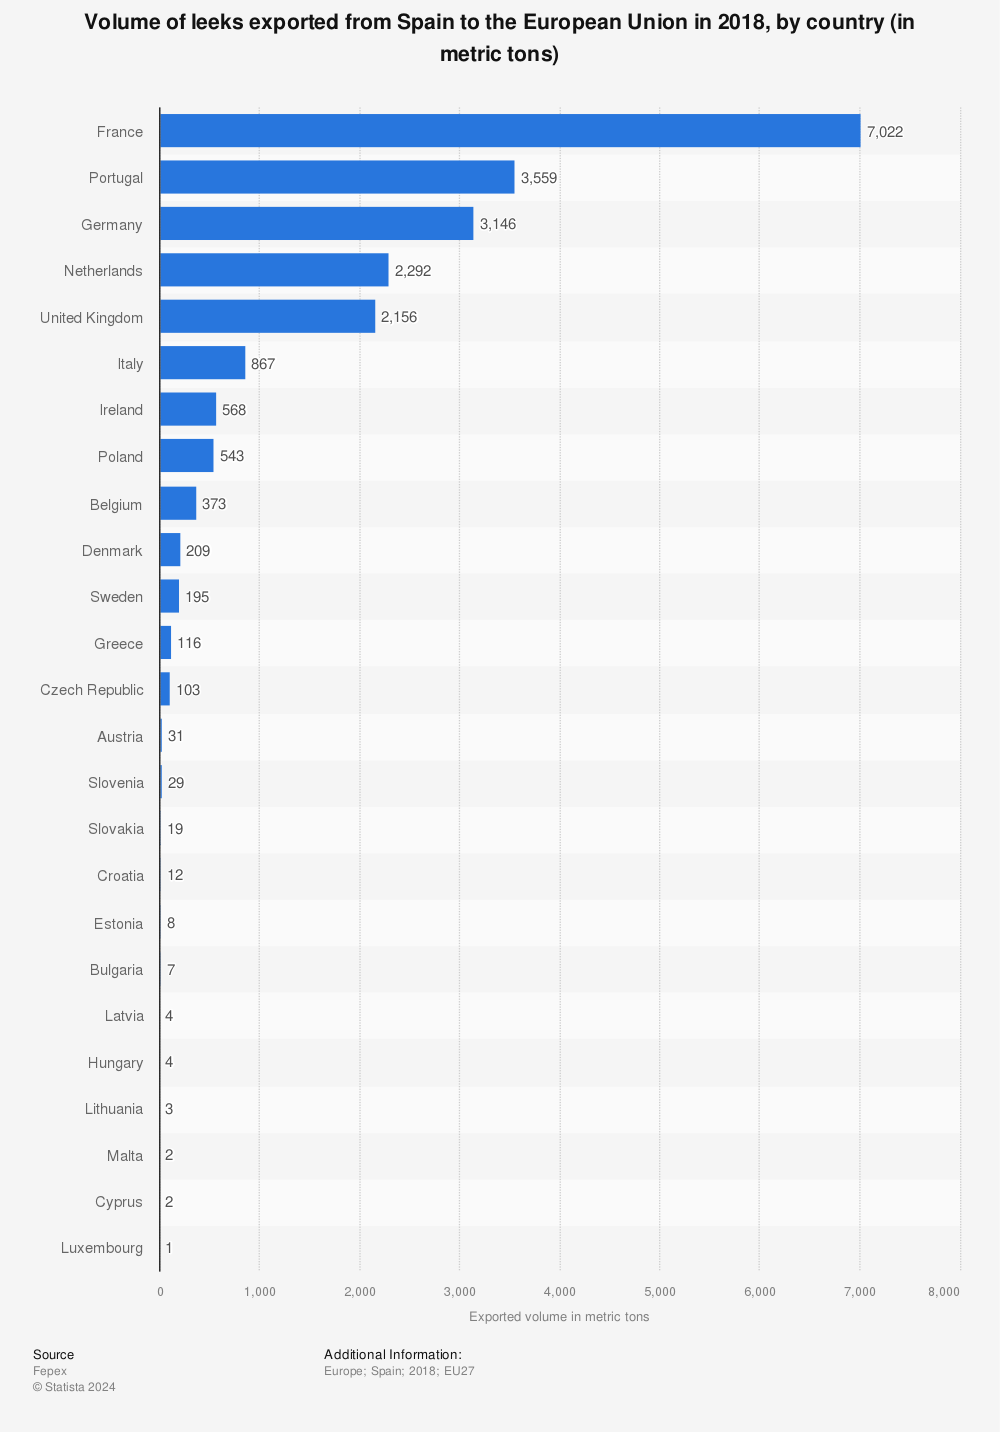 Statistic: Volume of leeks exported from Spain to the European Union in 2018, by country (in metric tons) | Statista